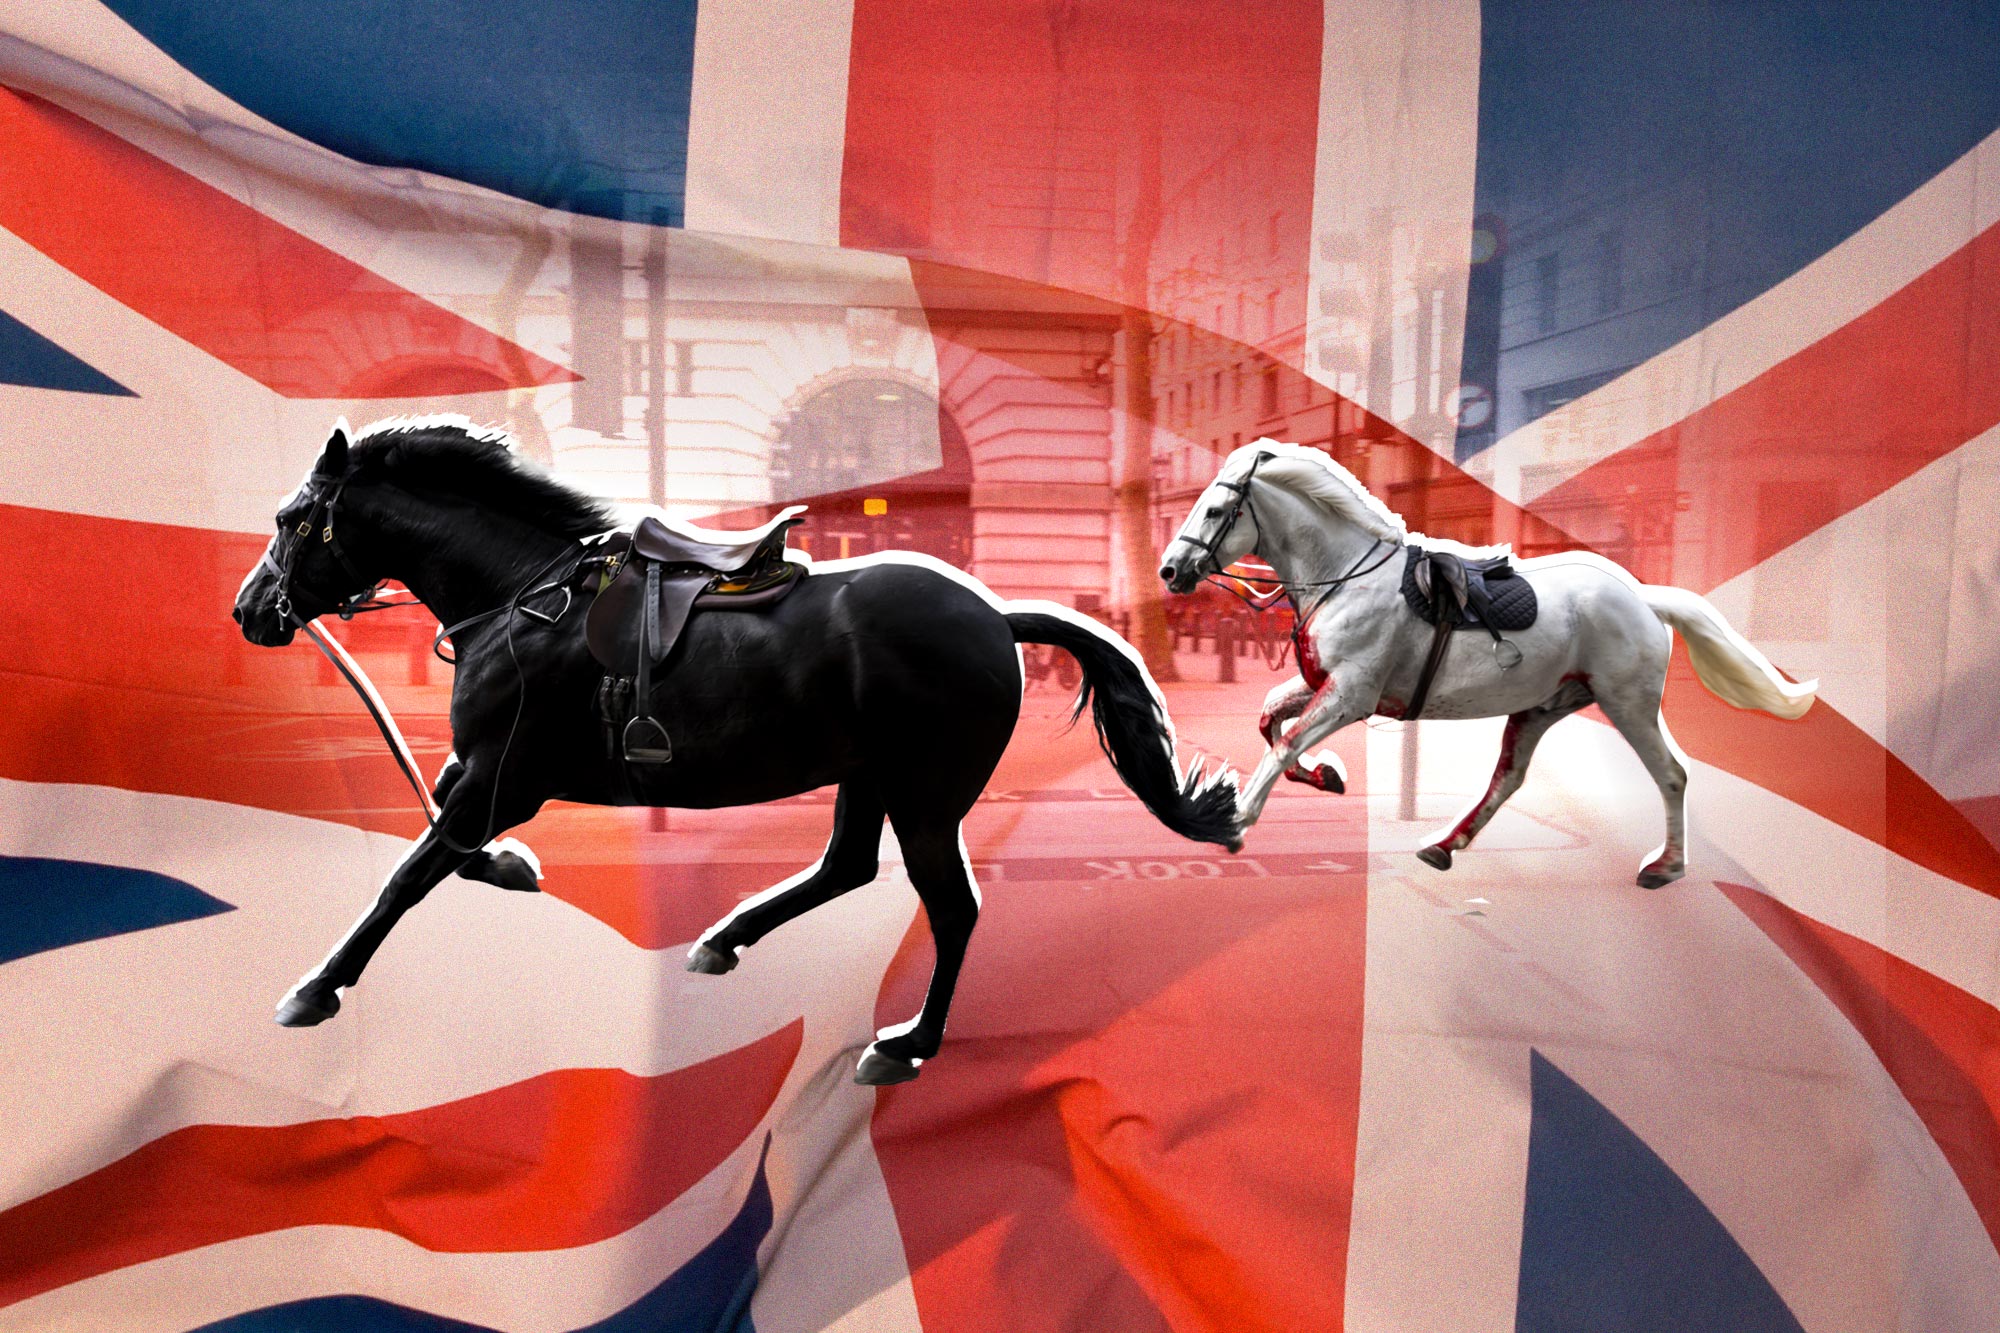 A photo illustration of the escaped horses against the flag of the United Kingdom